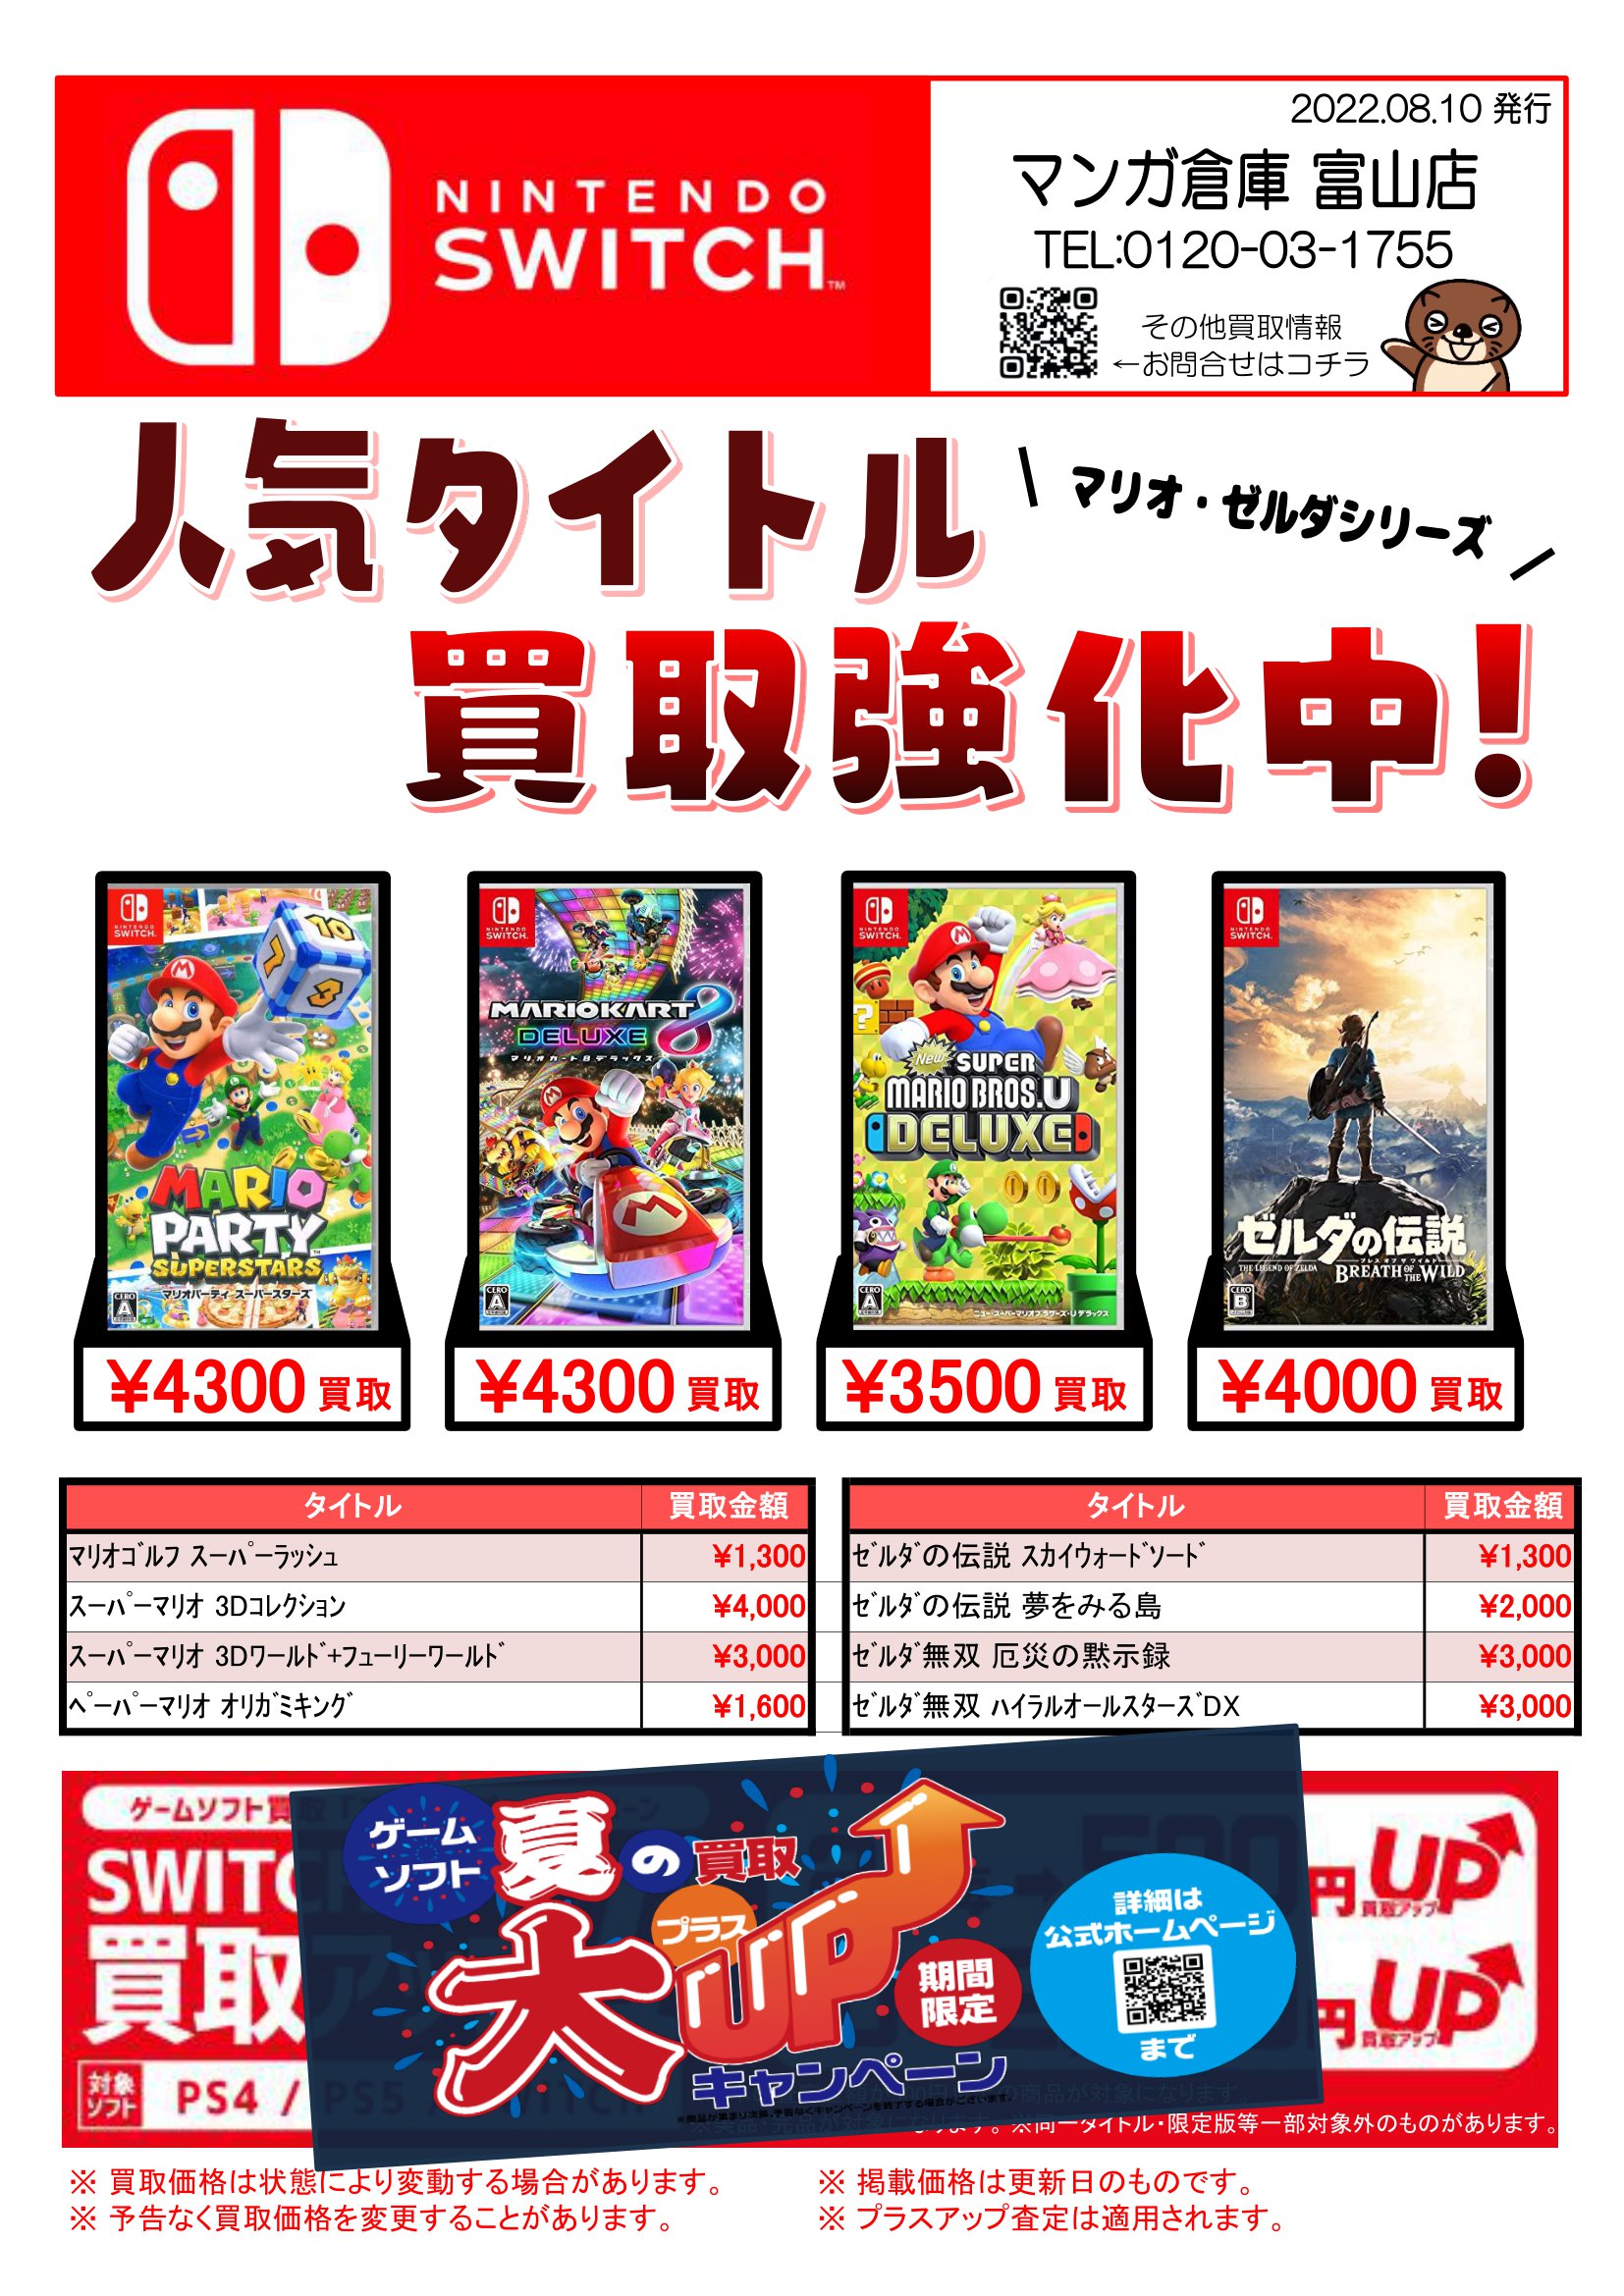 Switchソフト買取金額更新しました！ #ゲーム | マンガ倉庫 富山店